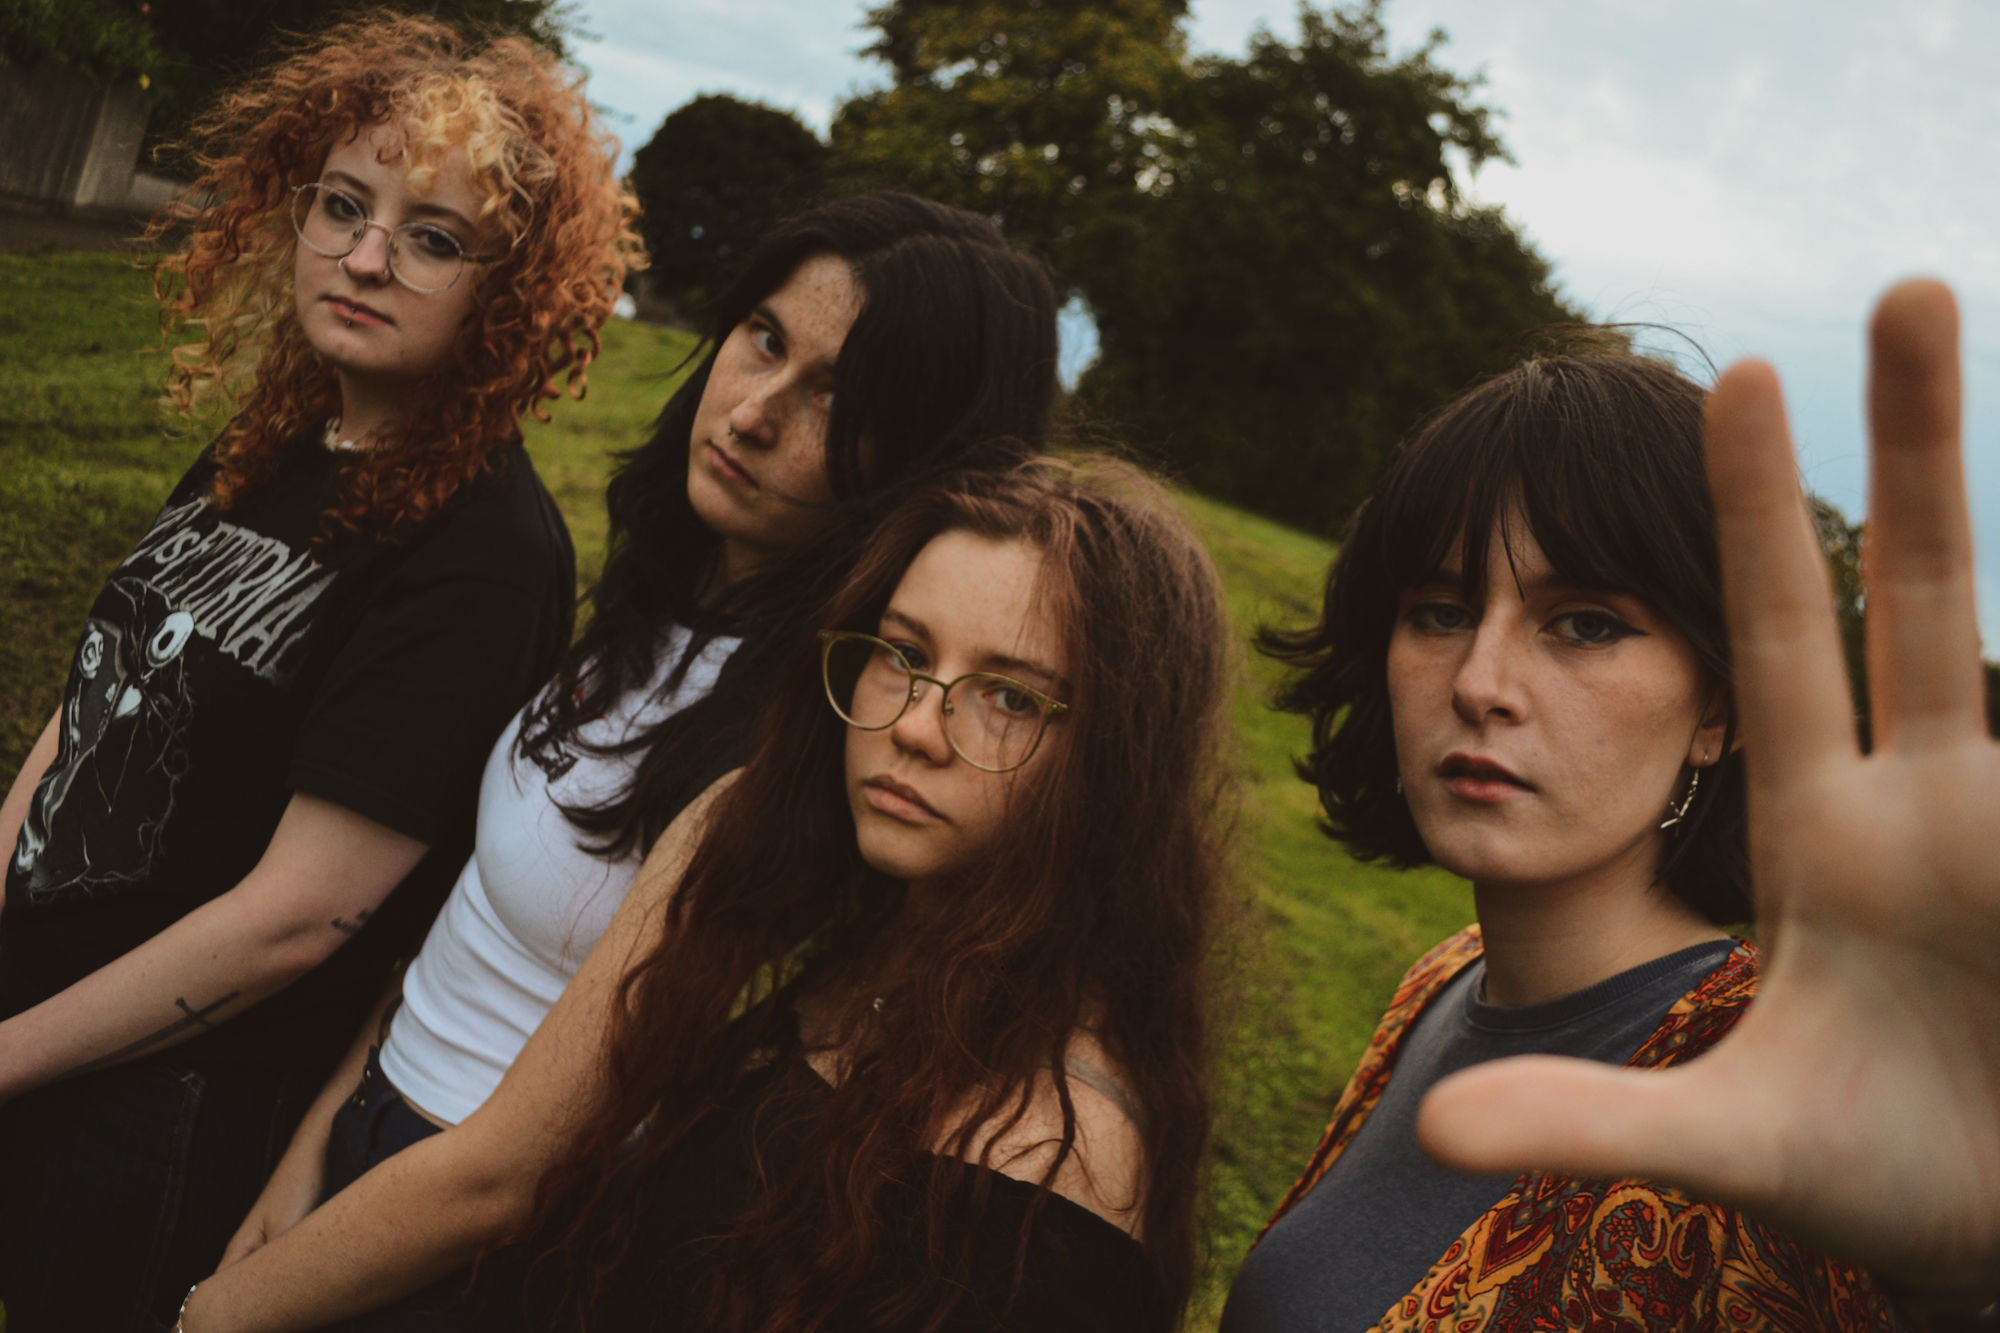 Martina Moon, the Eponymous Frontperson of the Dublin Alt-Rock Band Martina  and the Moons, Discusses the Band’s New Single “Emigrate” and Next Week’s Gaza Crisis Appeal Fundraiser